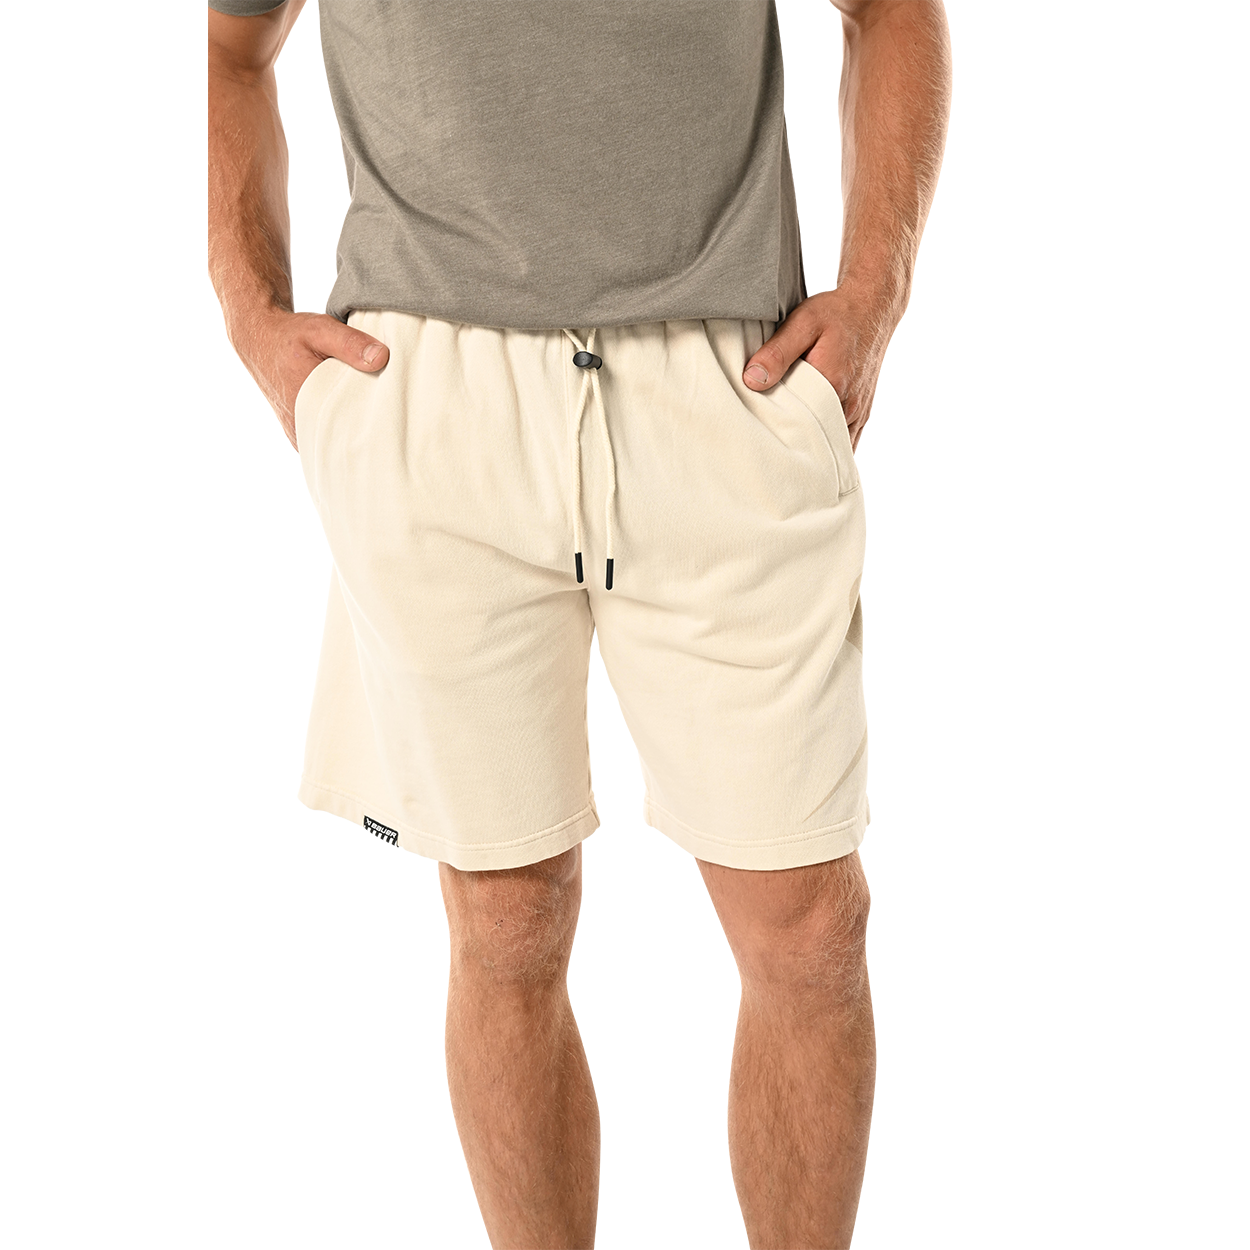 BAUER FRENCH TERRY KNIT SHORT SENIOR